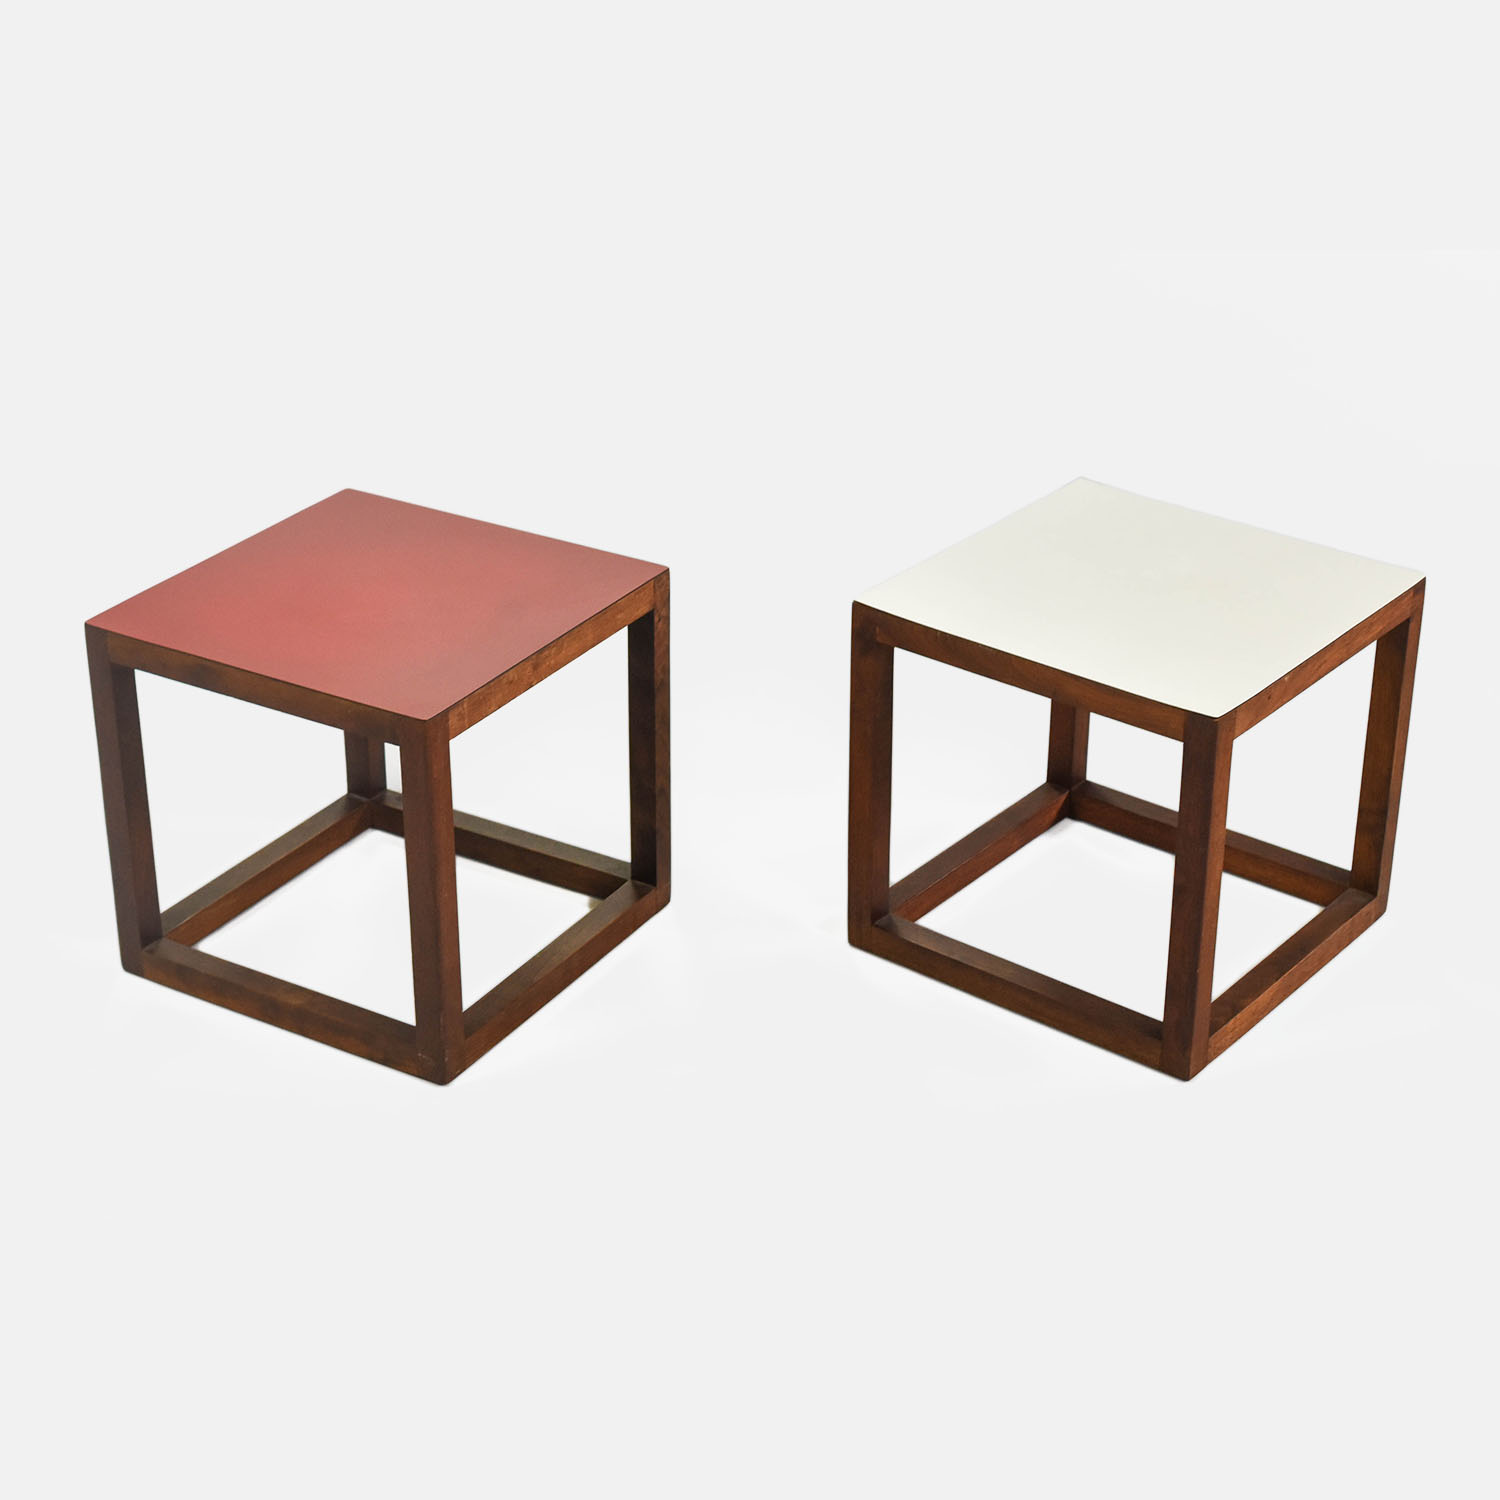 Two 1970s Retro Laminated Red and White Cube Side Tables